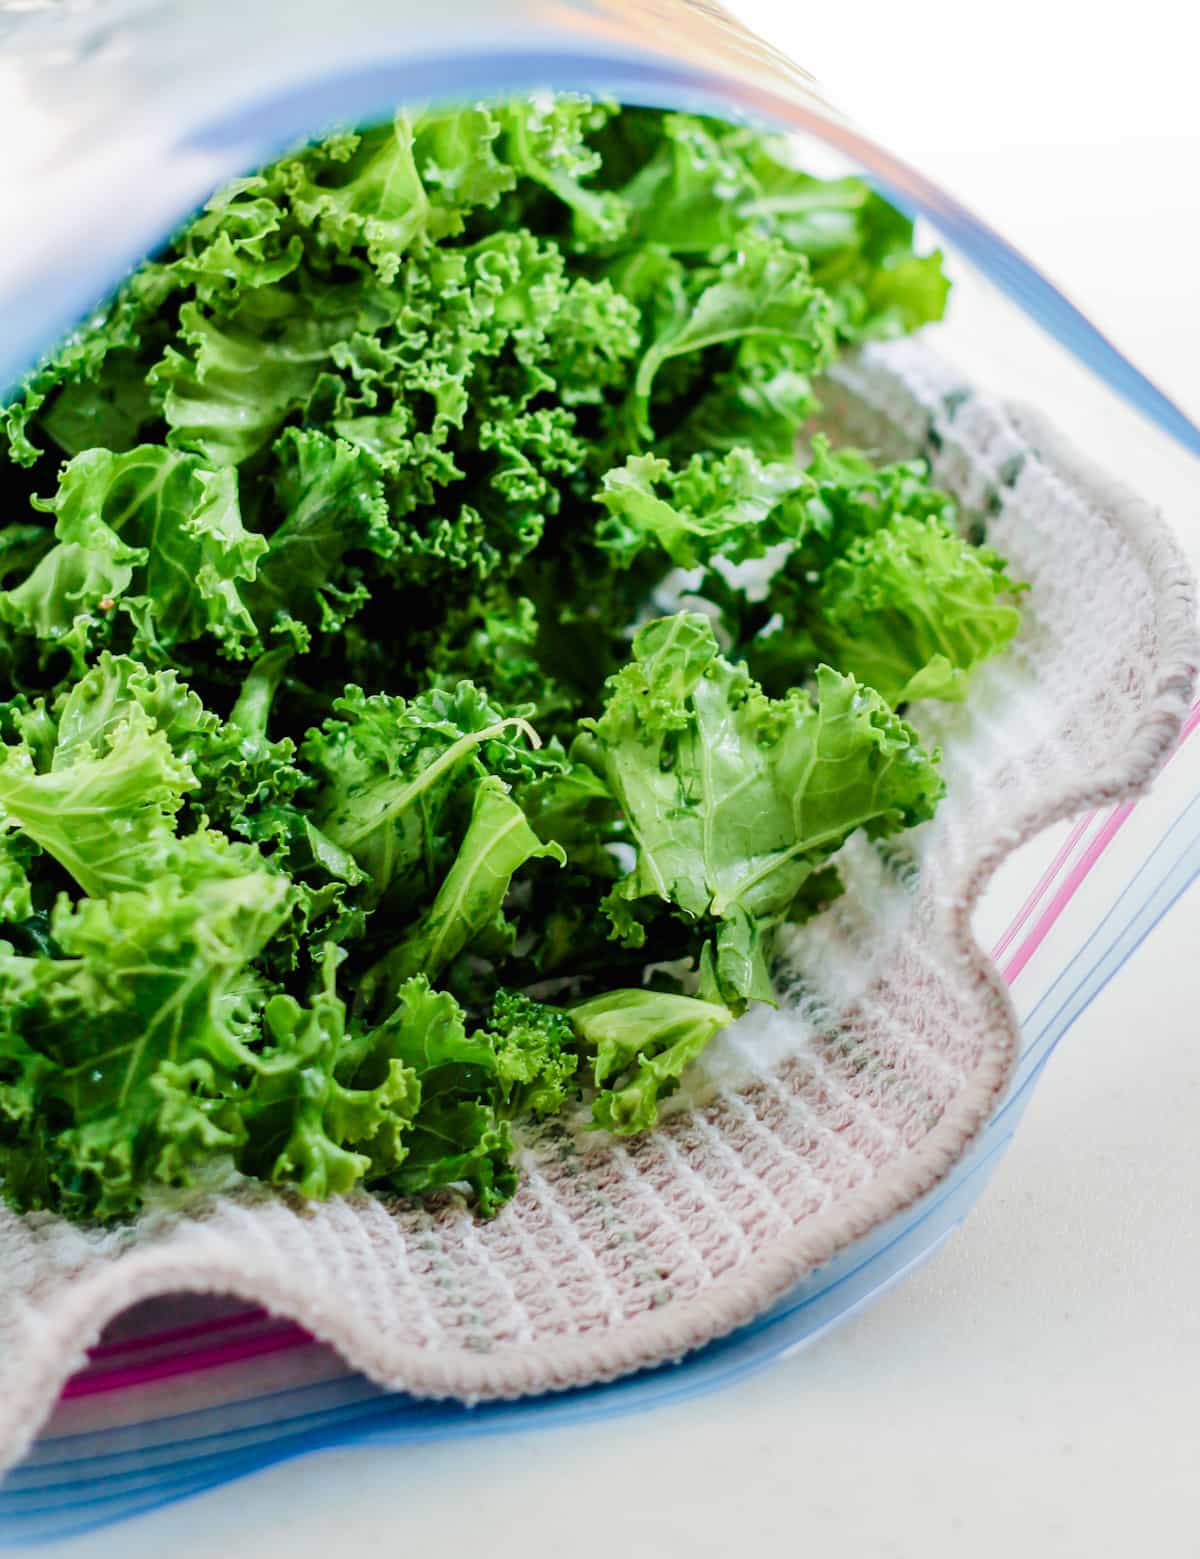 a ziploc bag lined with a kitchen cloth and stuffed with leafy greens.